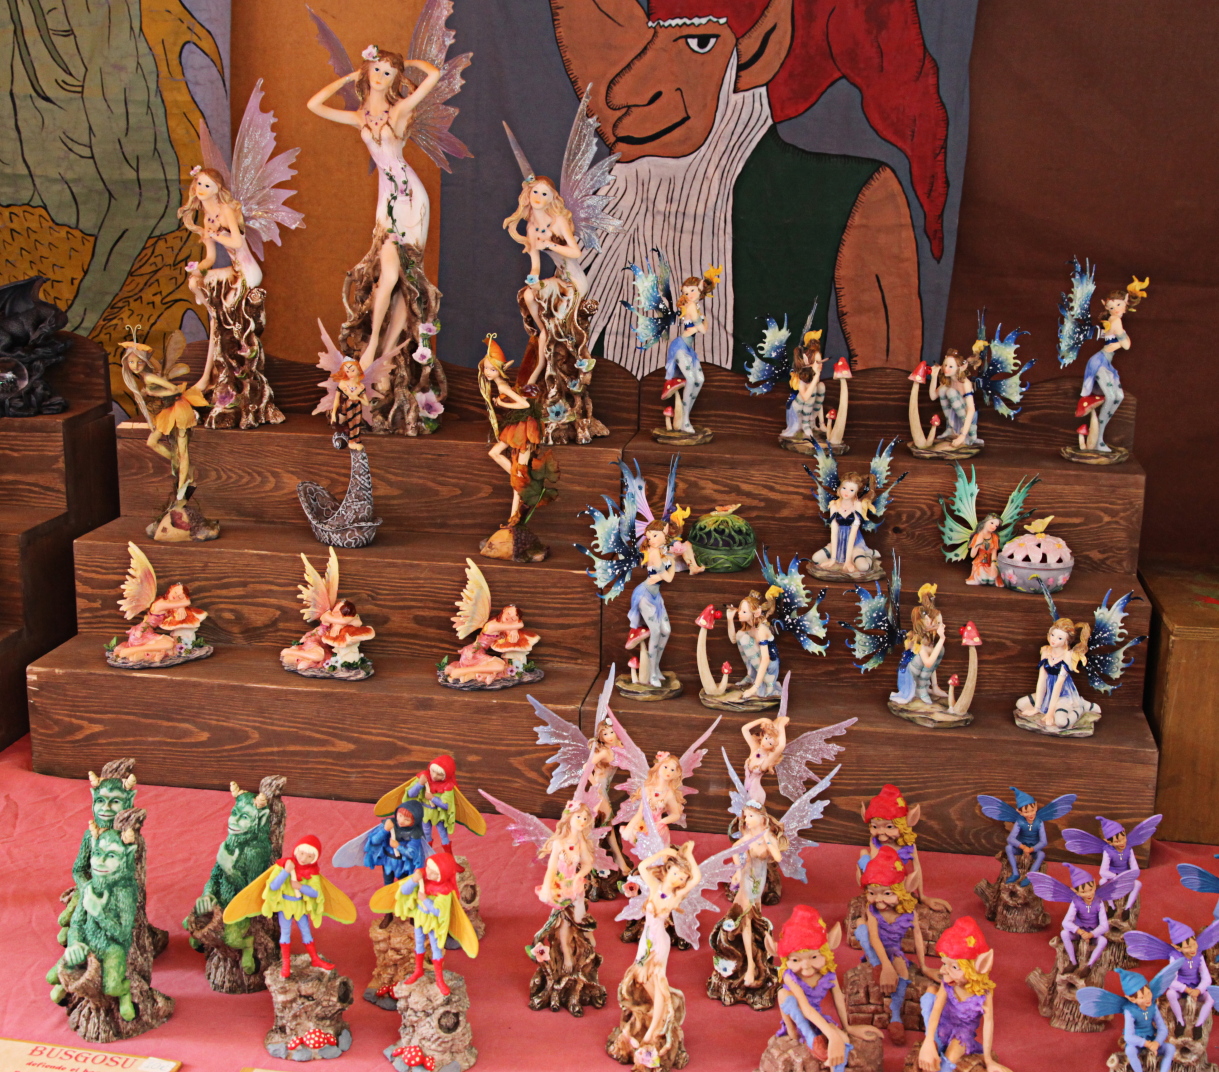 a collection of figurines of different sizes and colors